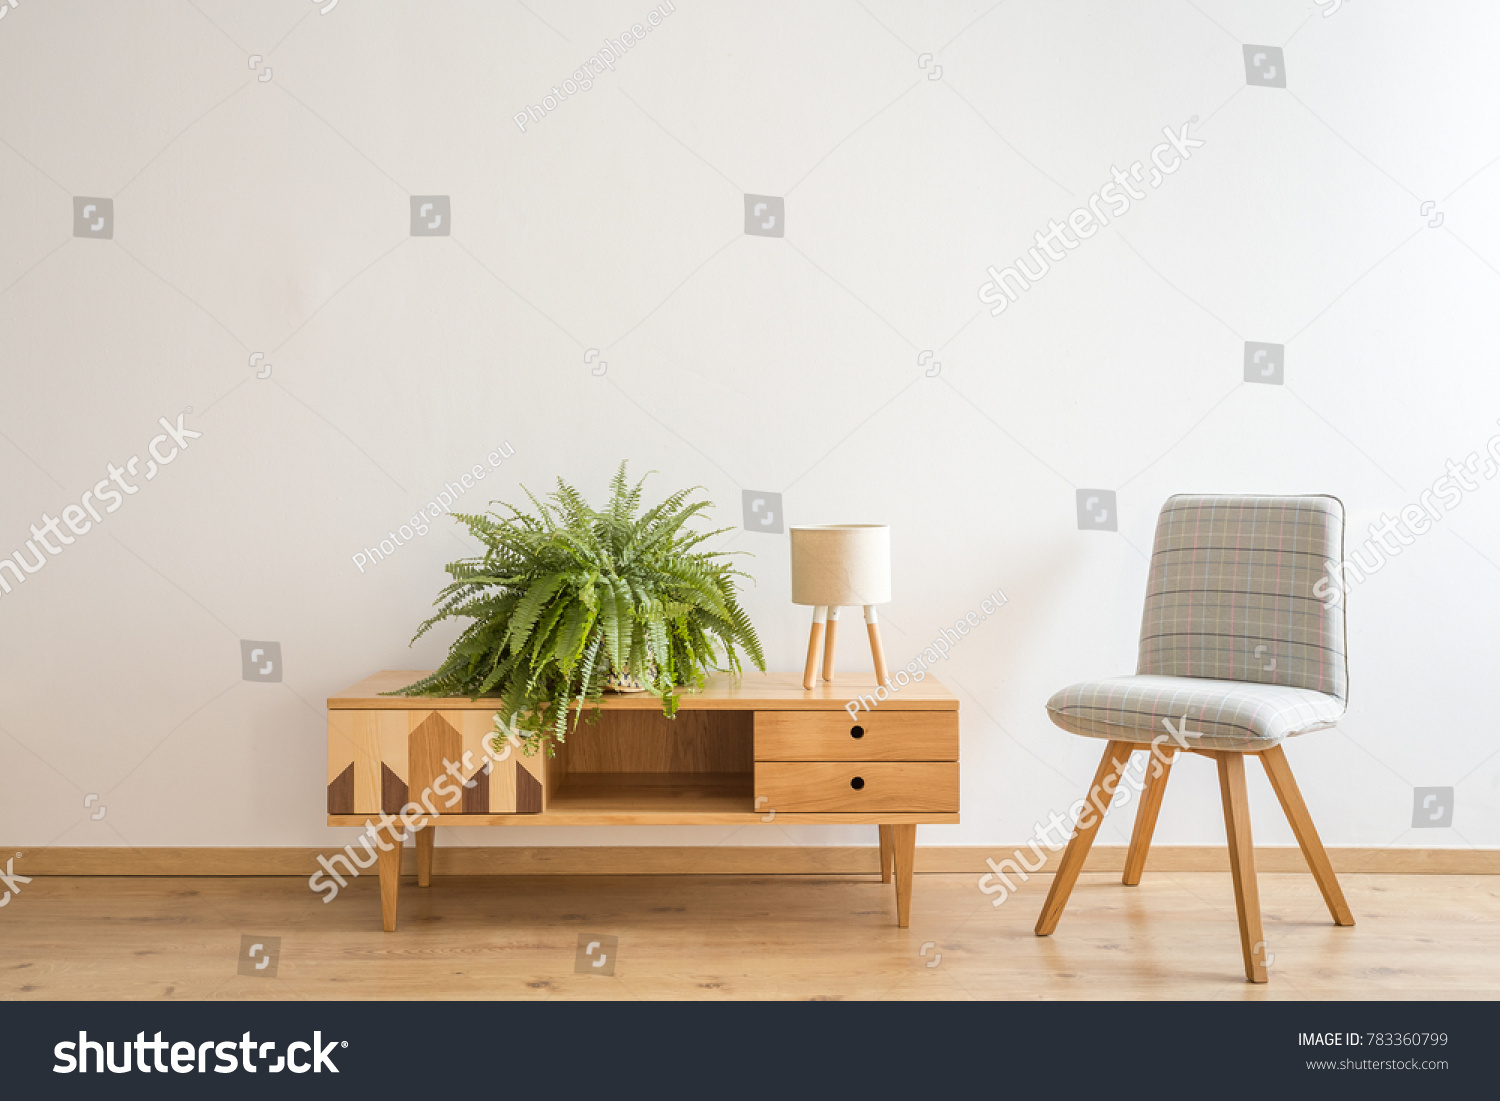 Simple, gray chair stranding next to a wooden cupboard with small lamp and fern on it #783360799